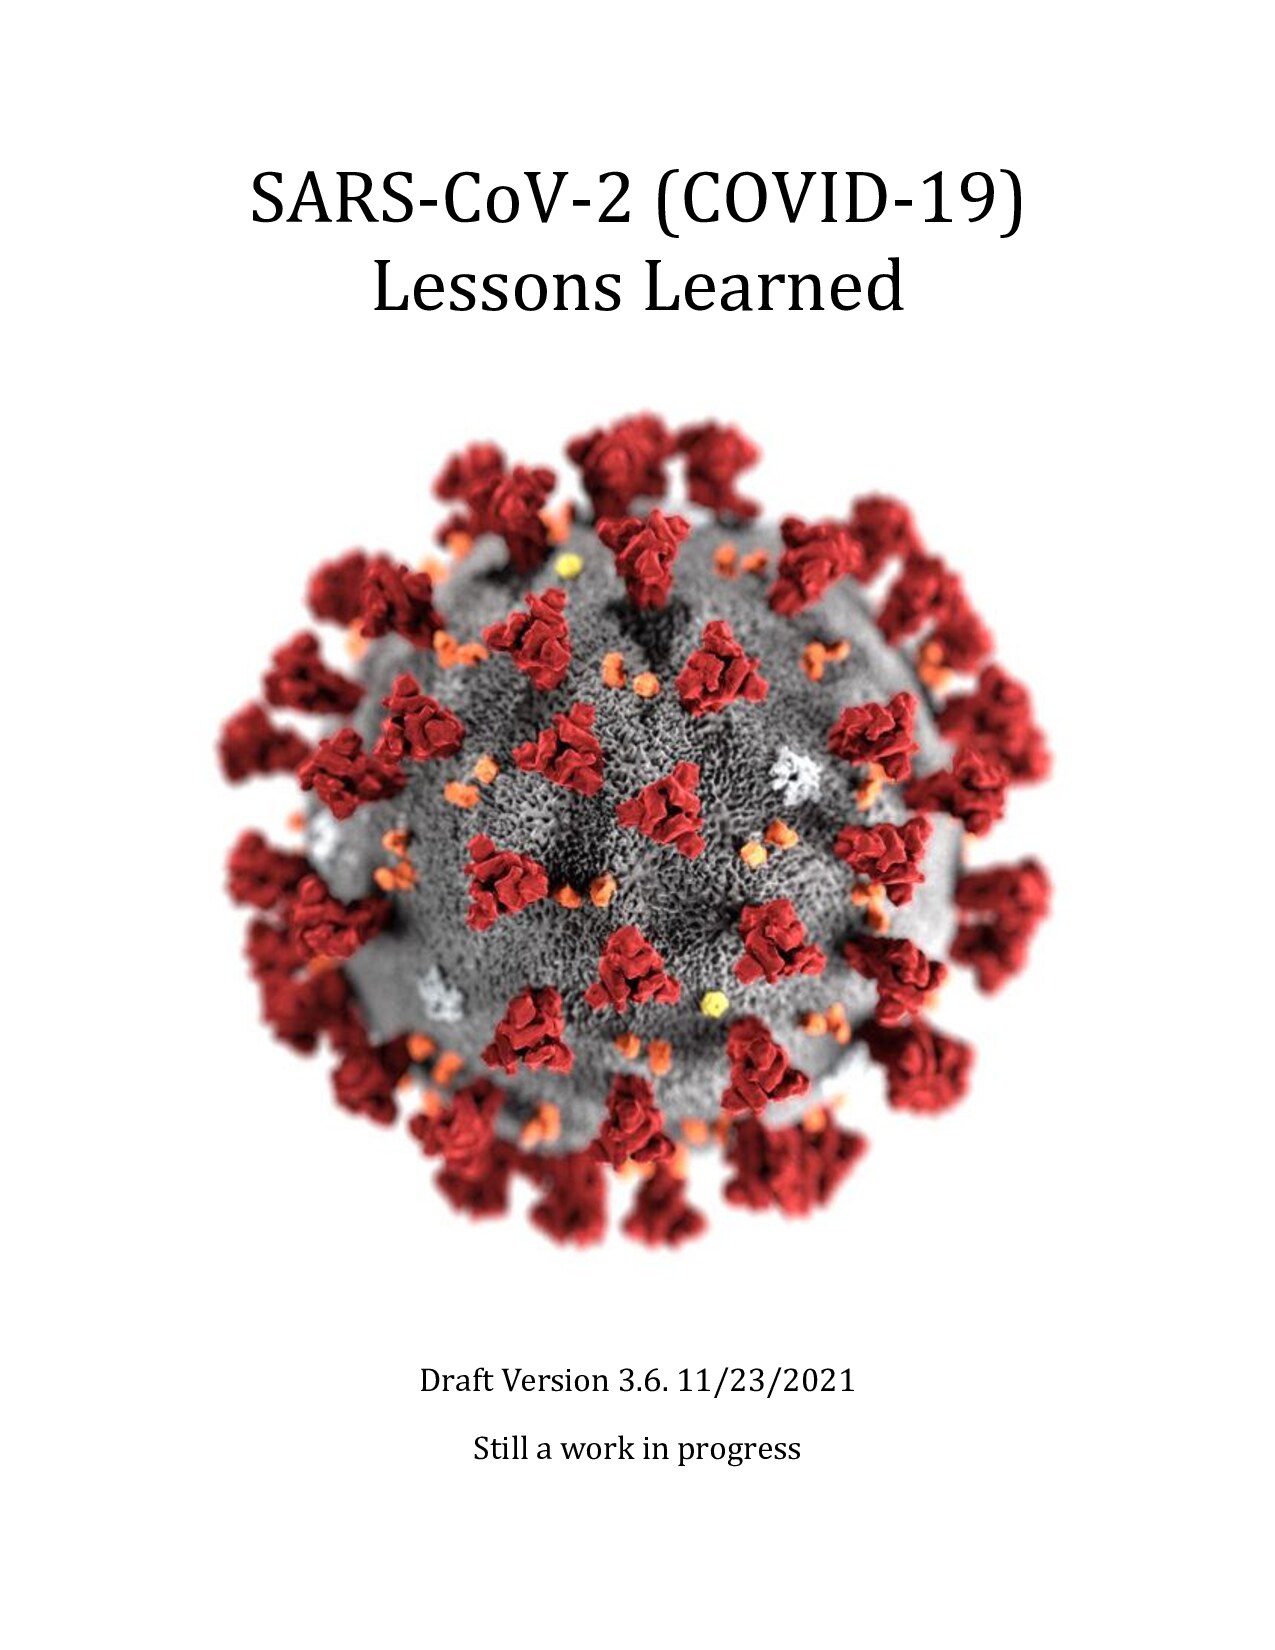 SARS-CoV-2 (COVID-19): Lessons Learned